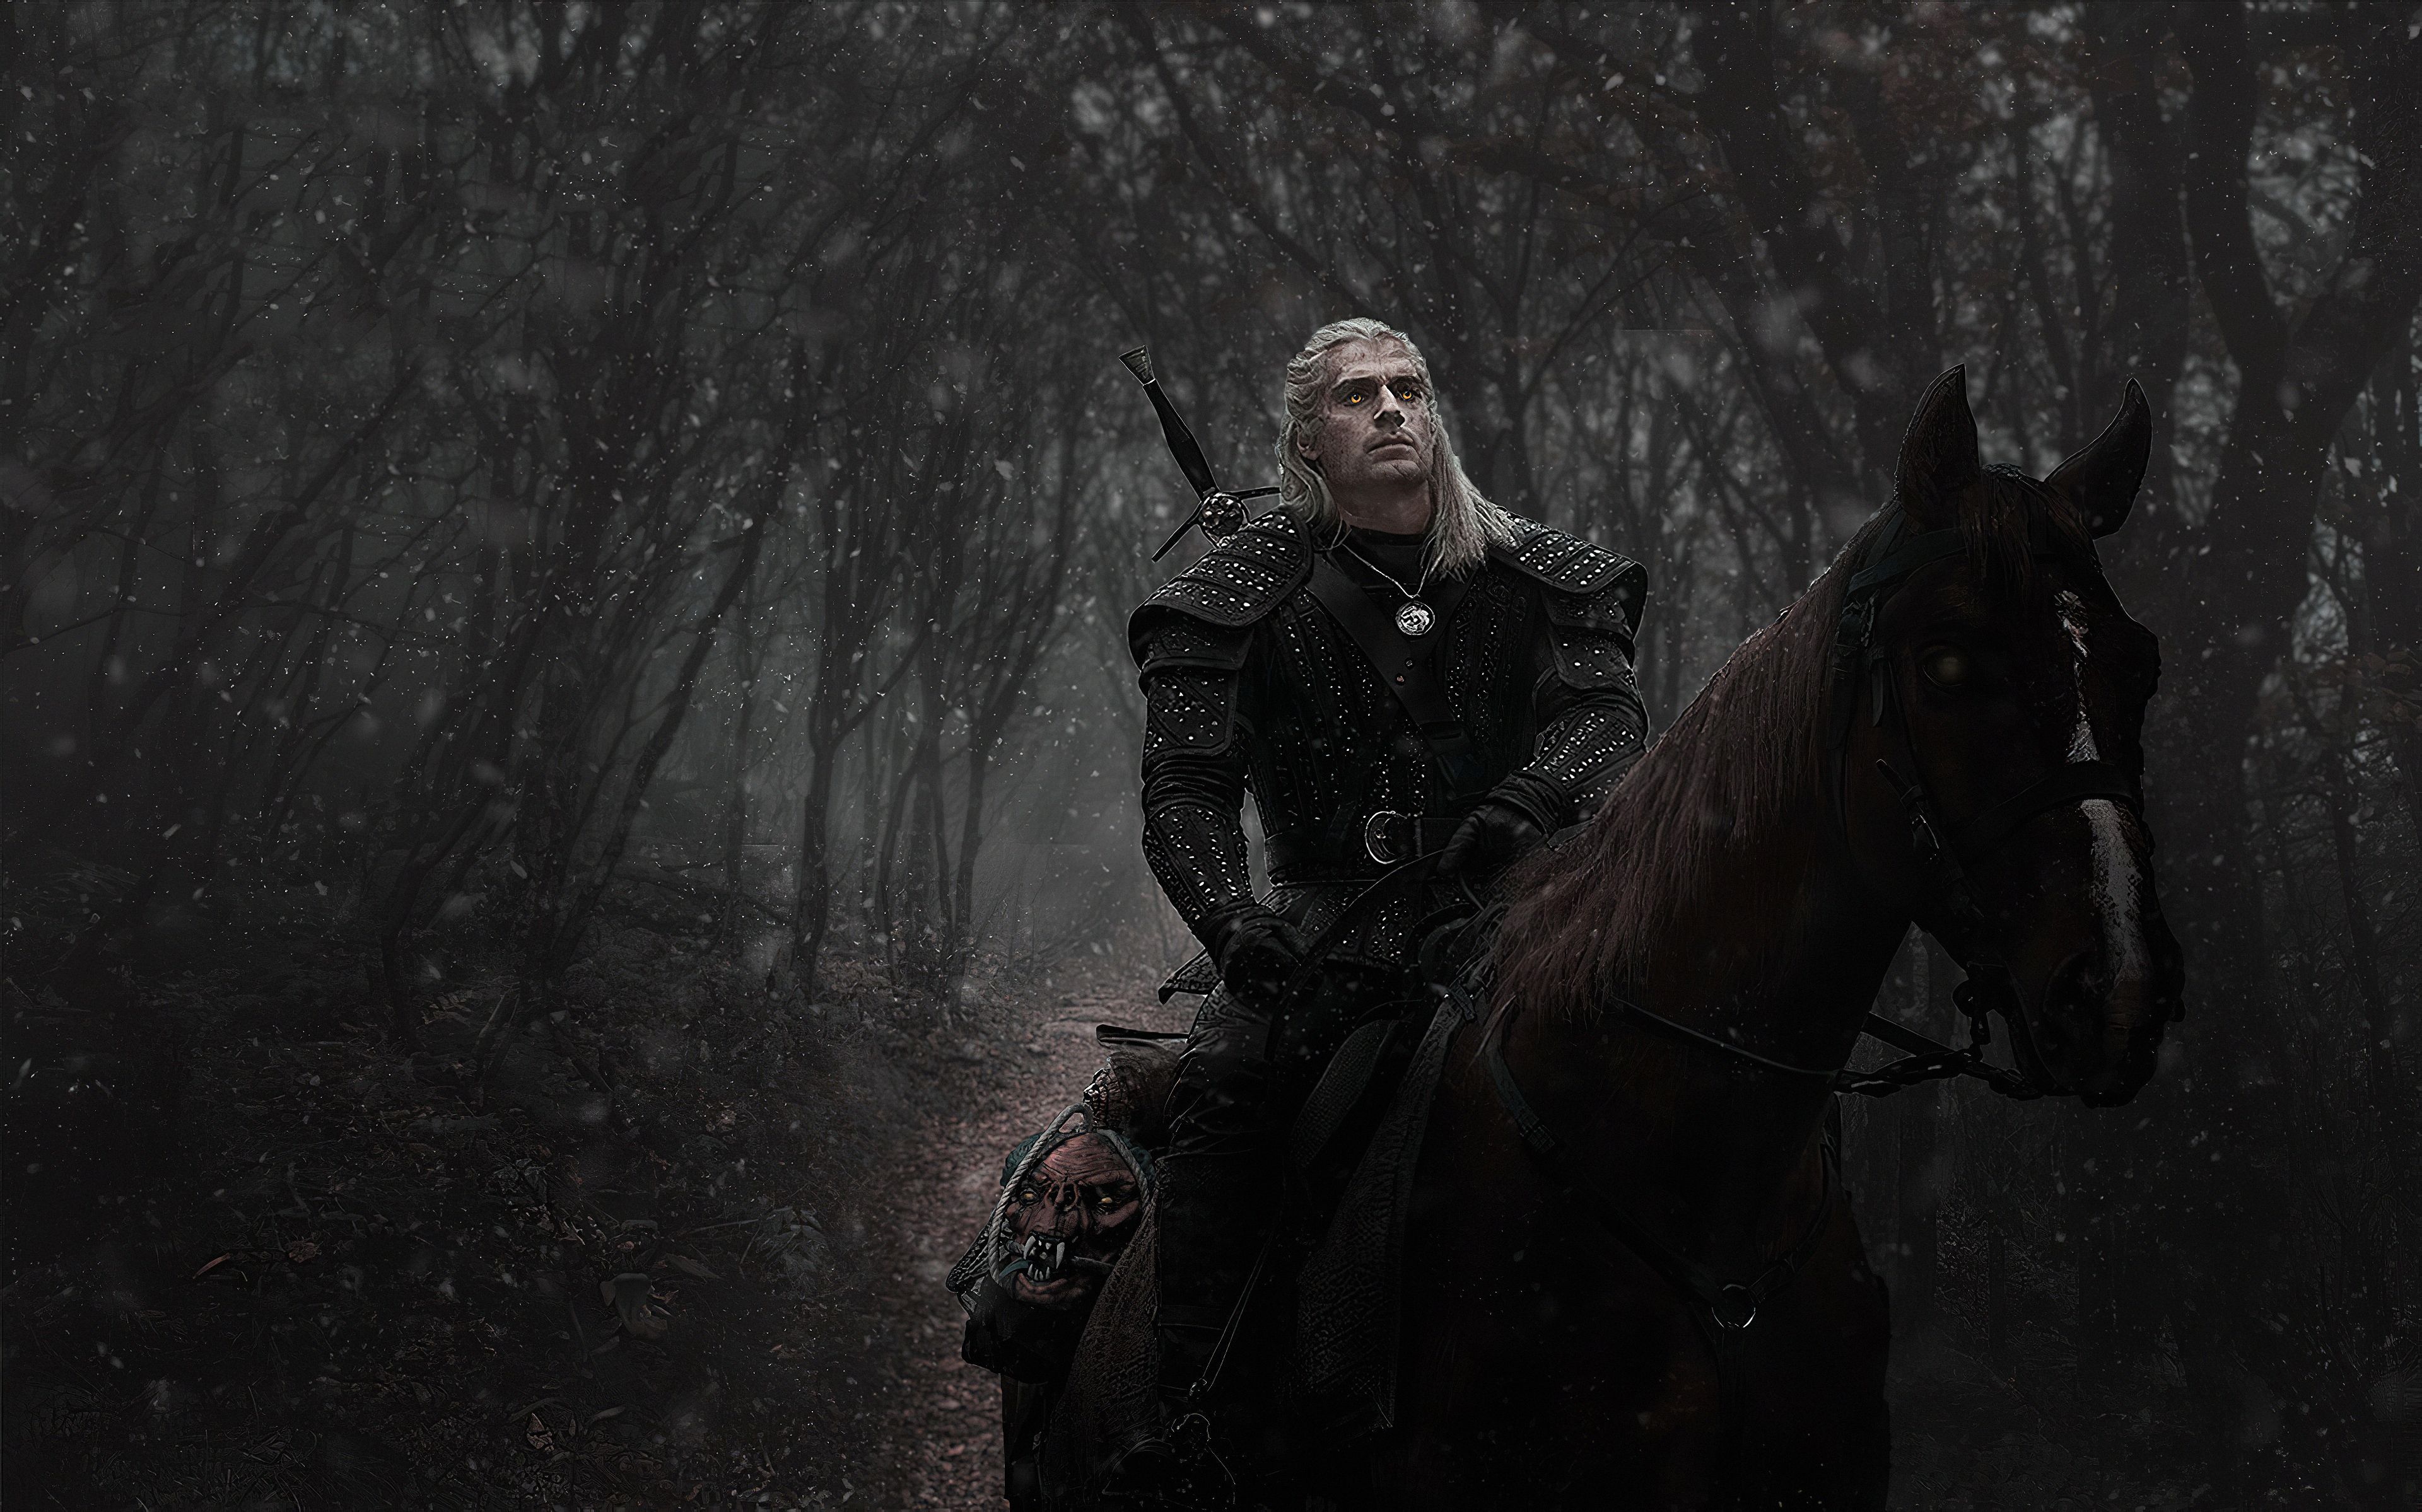 The Witcher The Witcher wallpaper background, The Witcher wallpaper 4k, The Witcher phone wallpaper HD 4k,. The witcher, Wallpaper background, The witcher movie